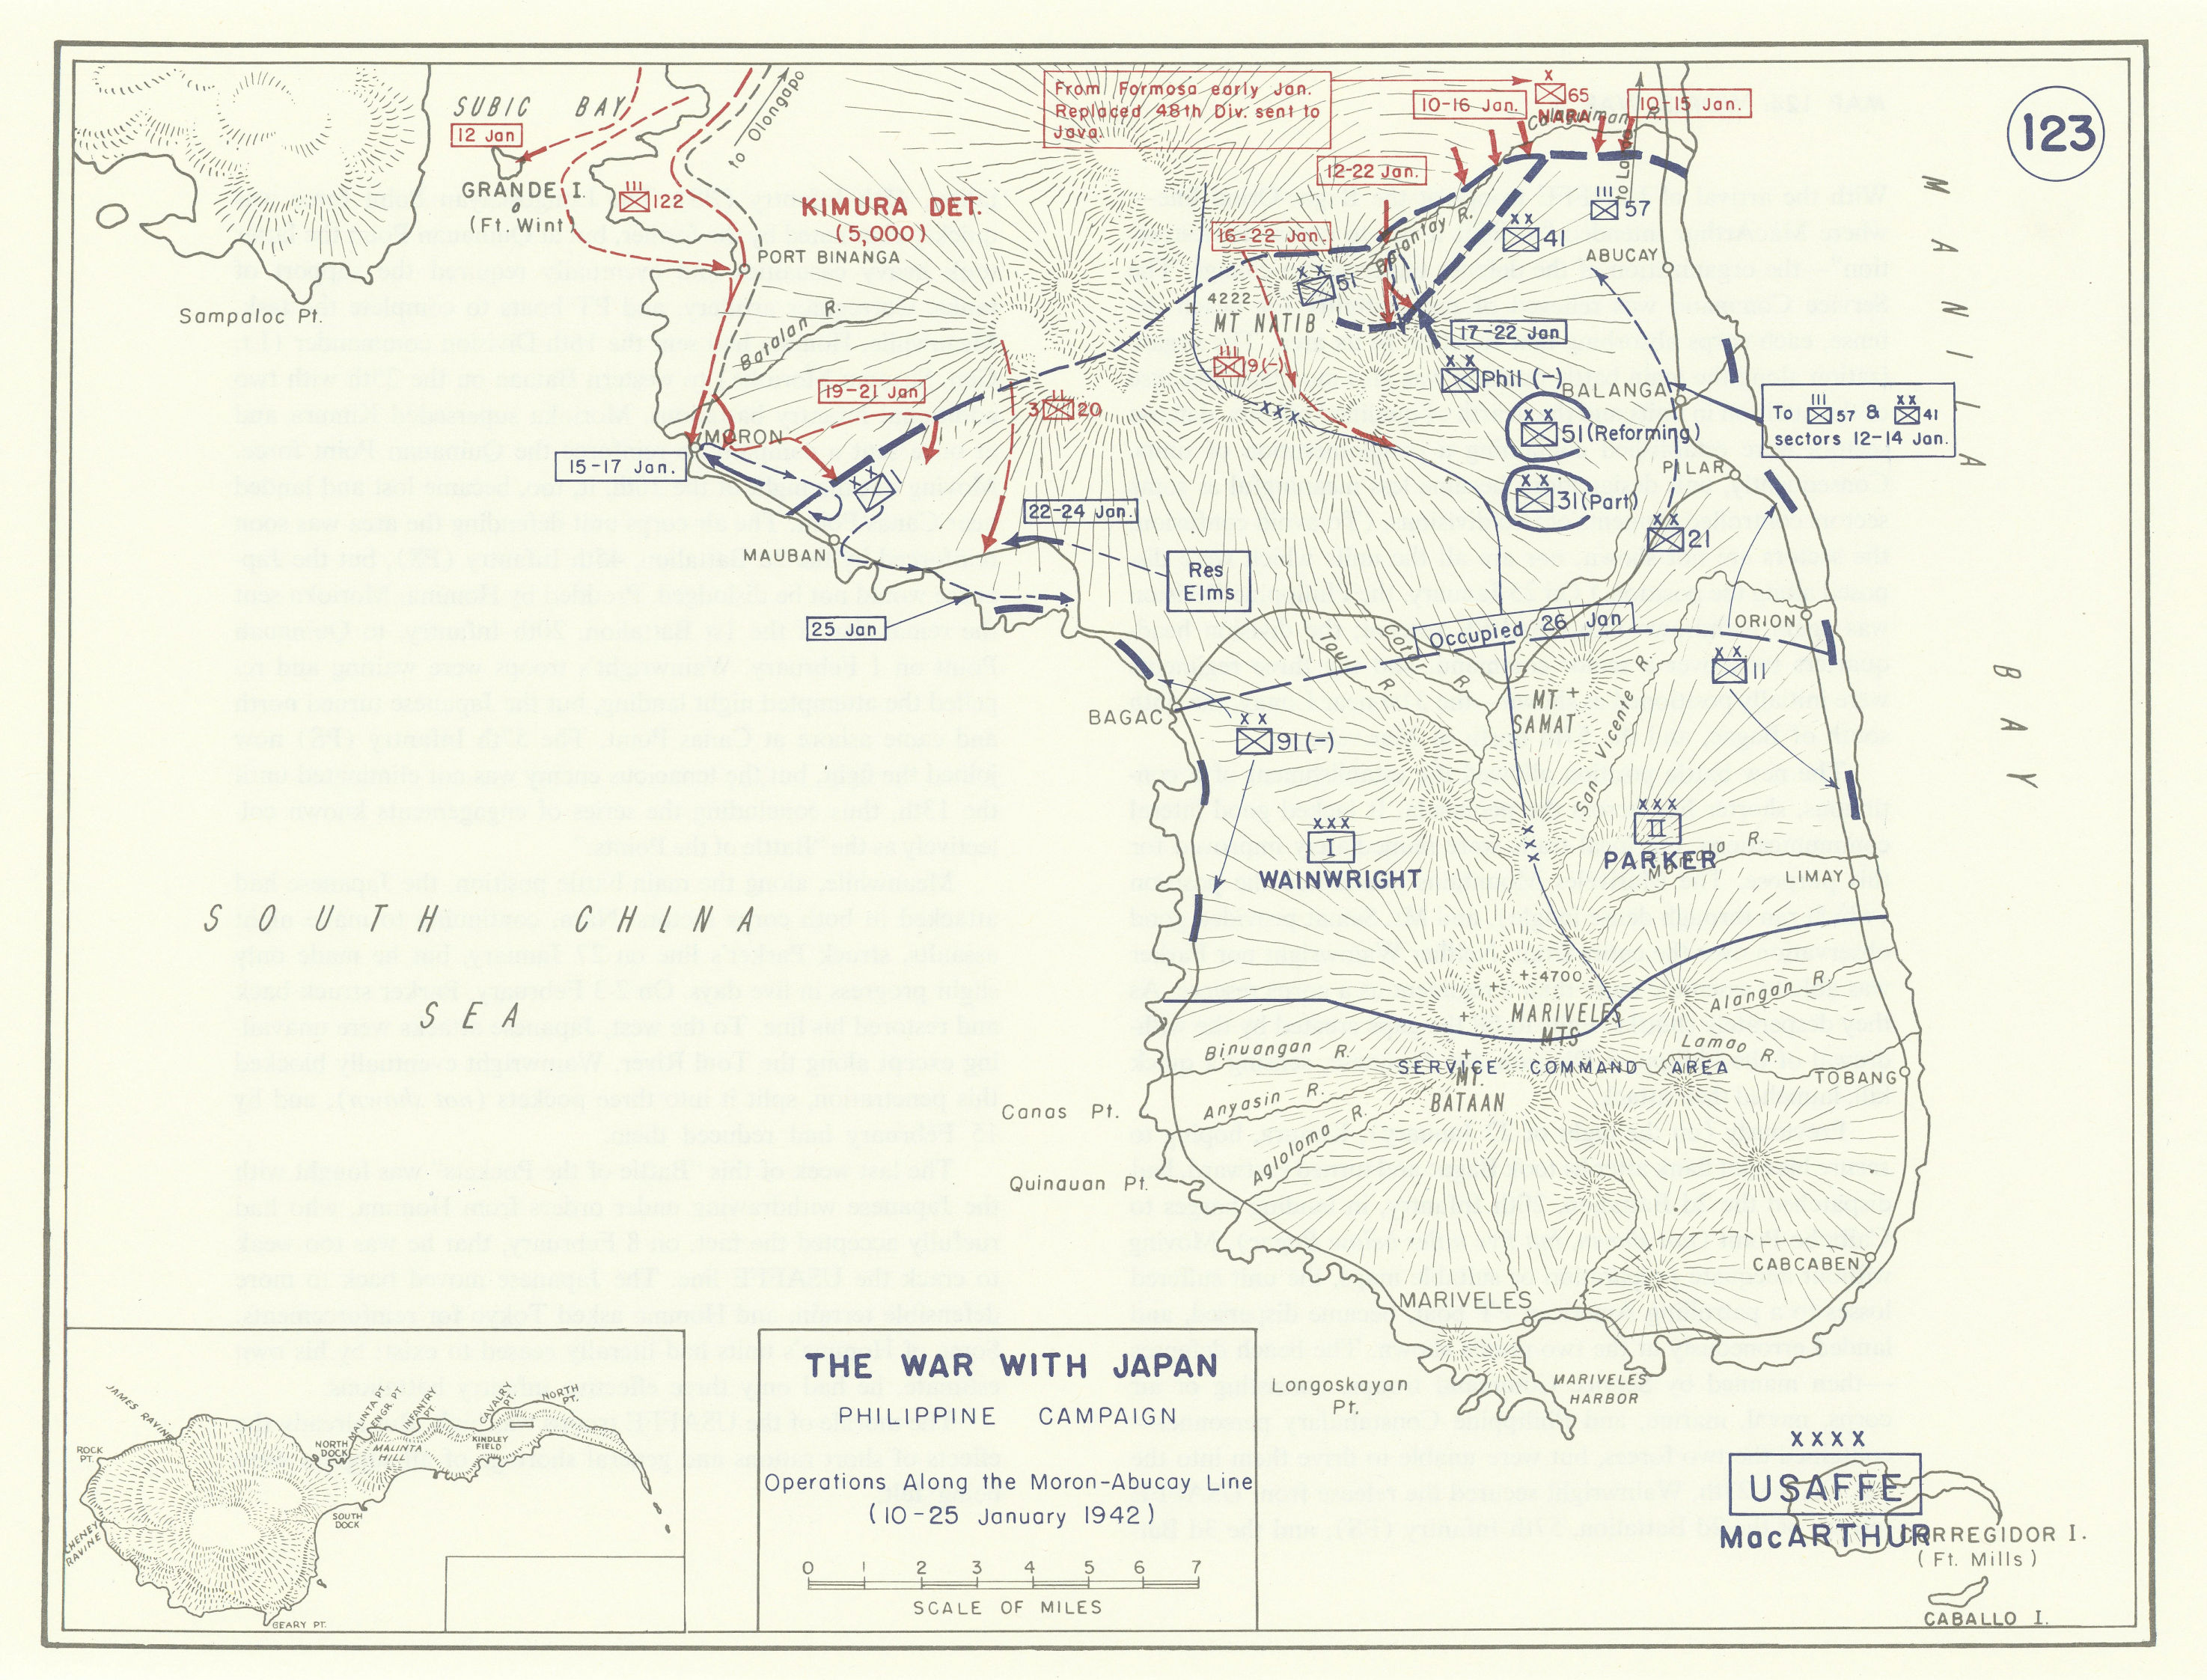 World War 2. Philippine Campaign. 10-25 Jan 1942 Moron-Abucay Line Ops 1959 map